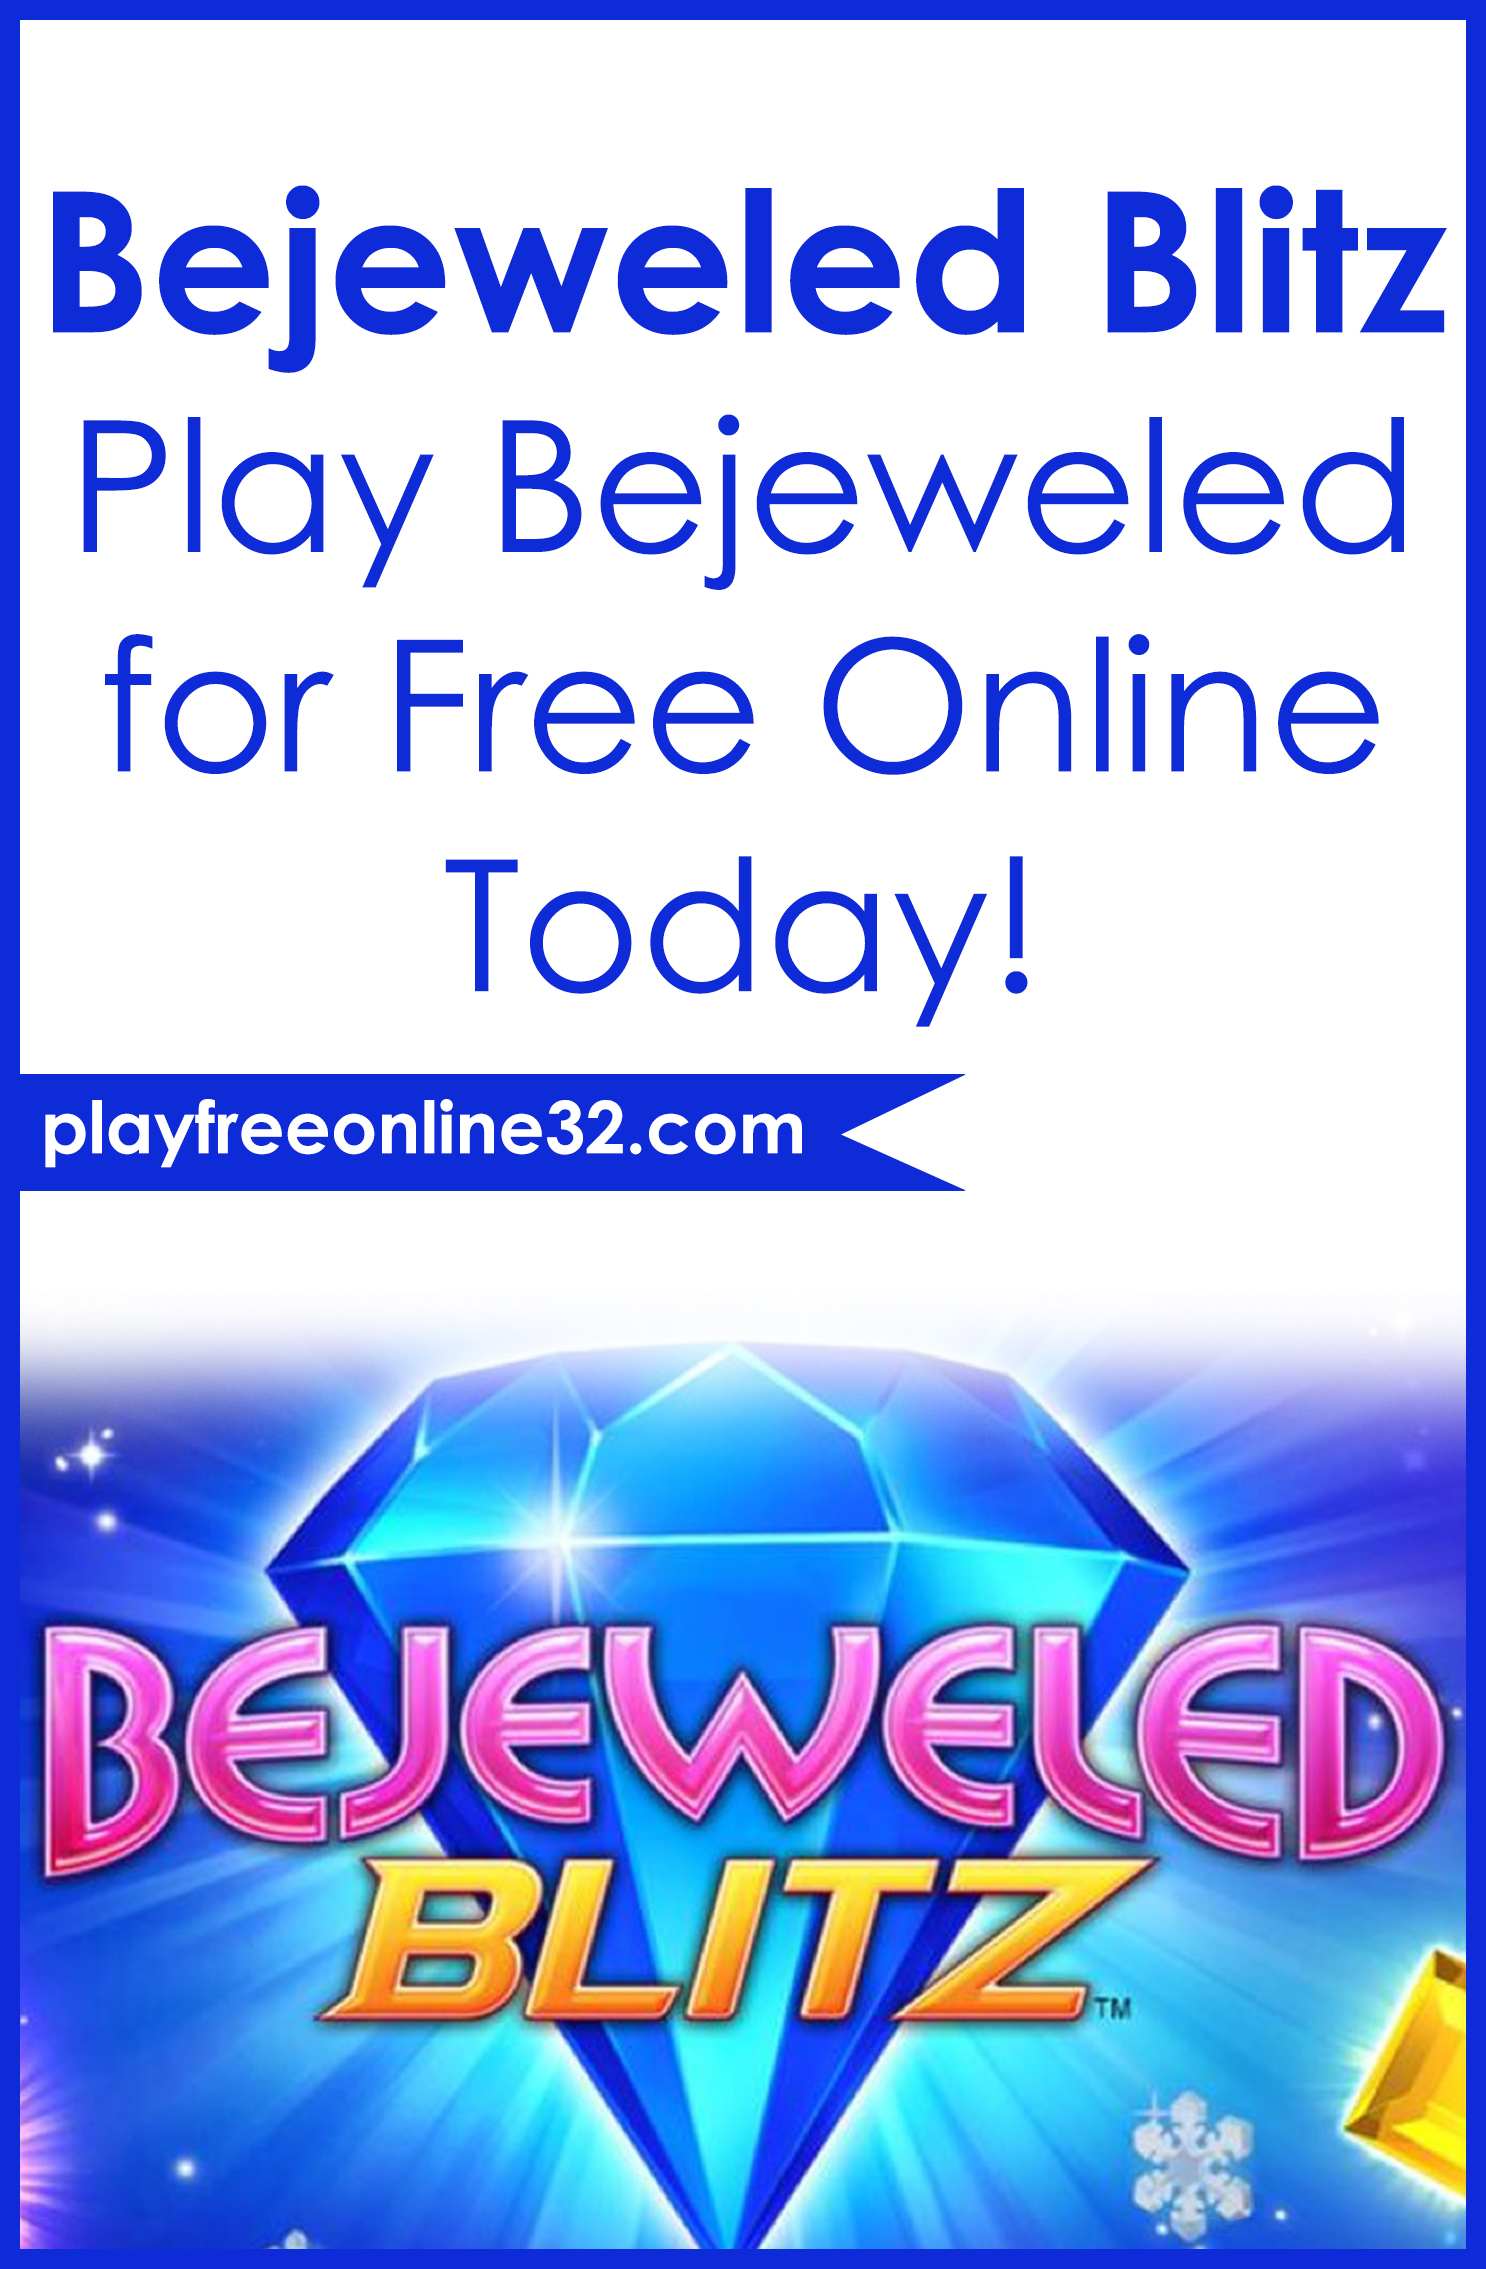 Bejeweled Blitz • Play Bejeweled for Free Online Today!